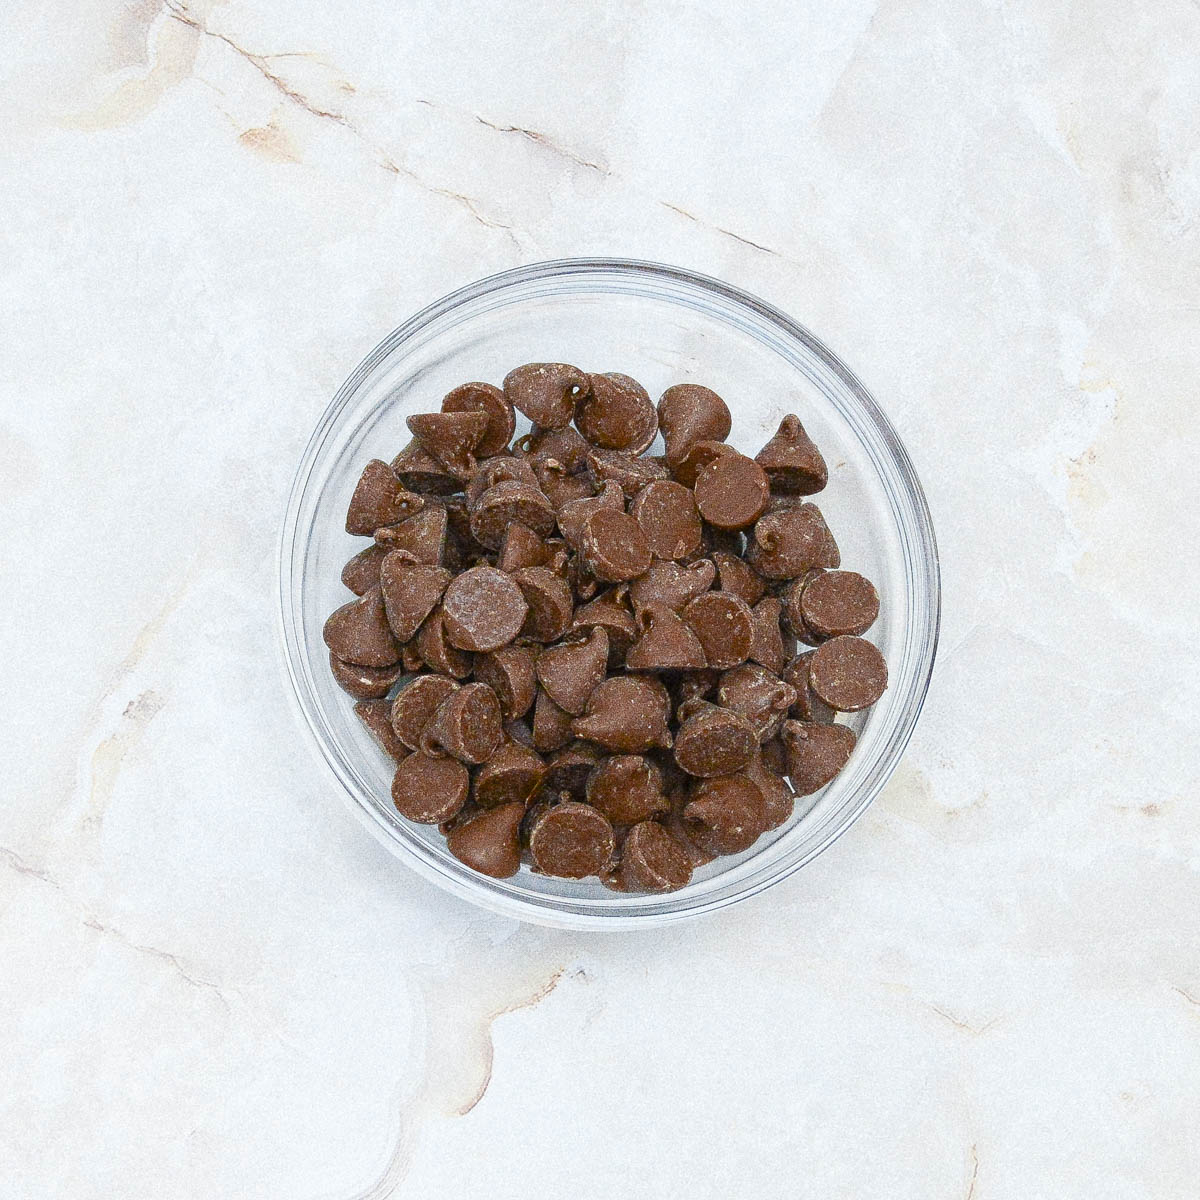 Chocolate chips in a glass bowl on a marble surface.